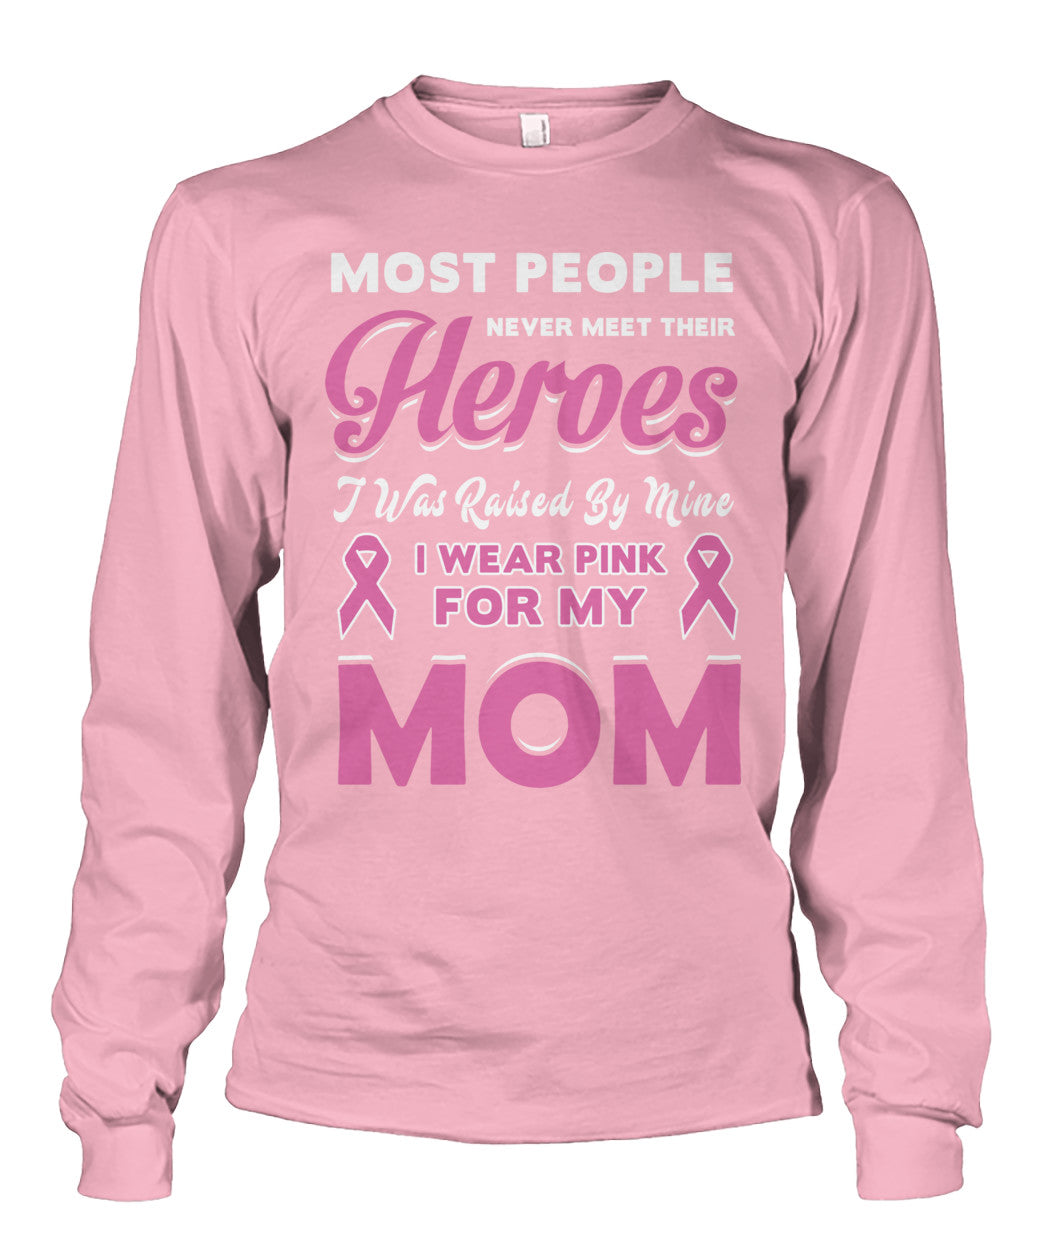 I Wear Pink For My Mom Shirts and Long Sleeves – Combat Breast Cancer